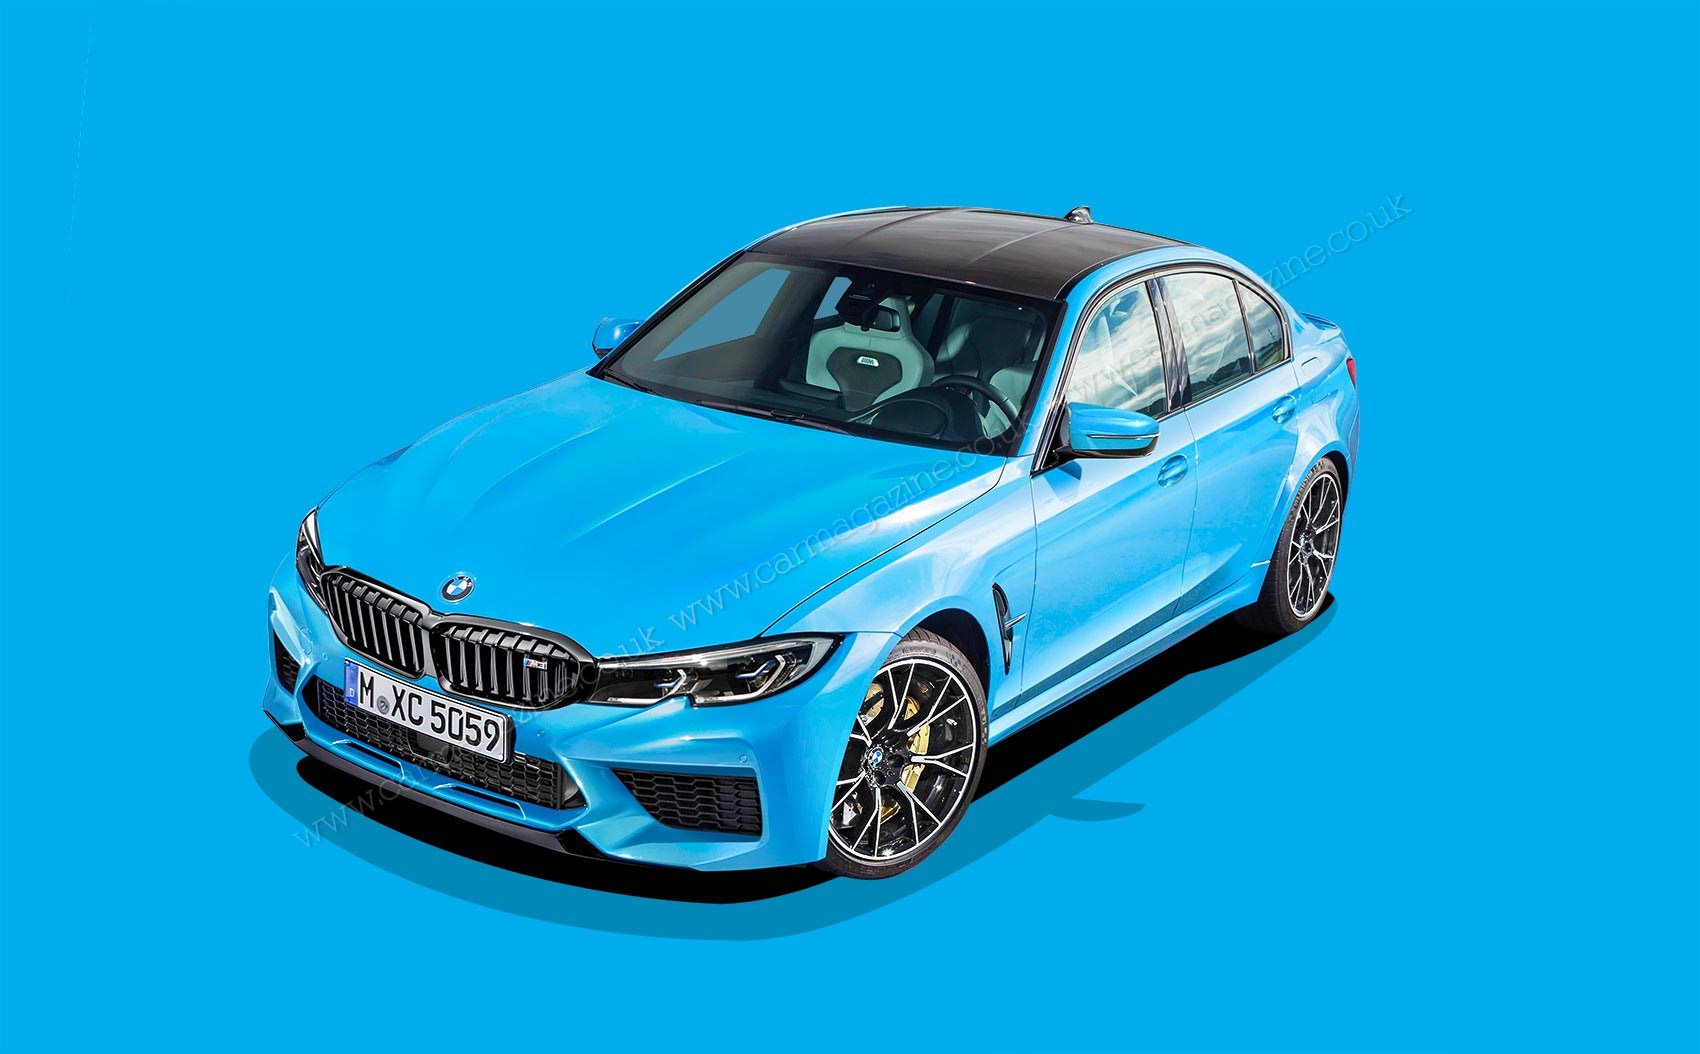 New 2020 BMW M3 (G80): 2wd Pure models or 4wd for 2020 sports saloon